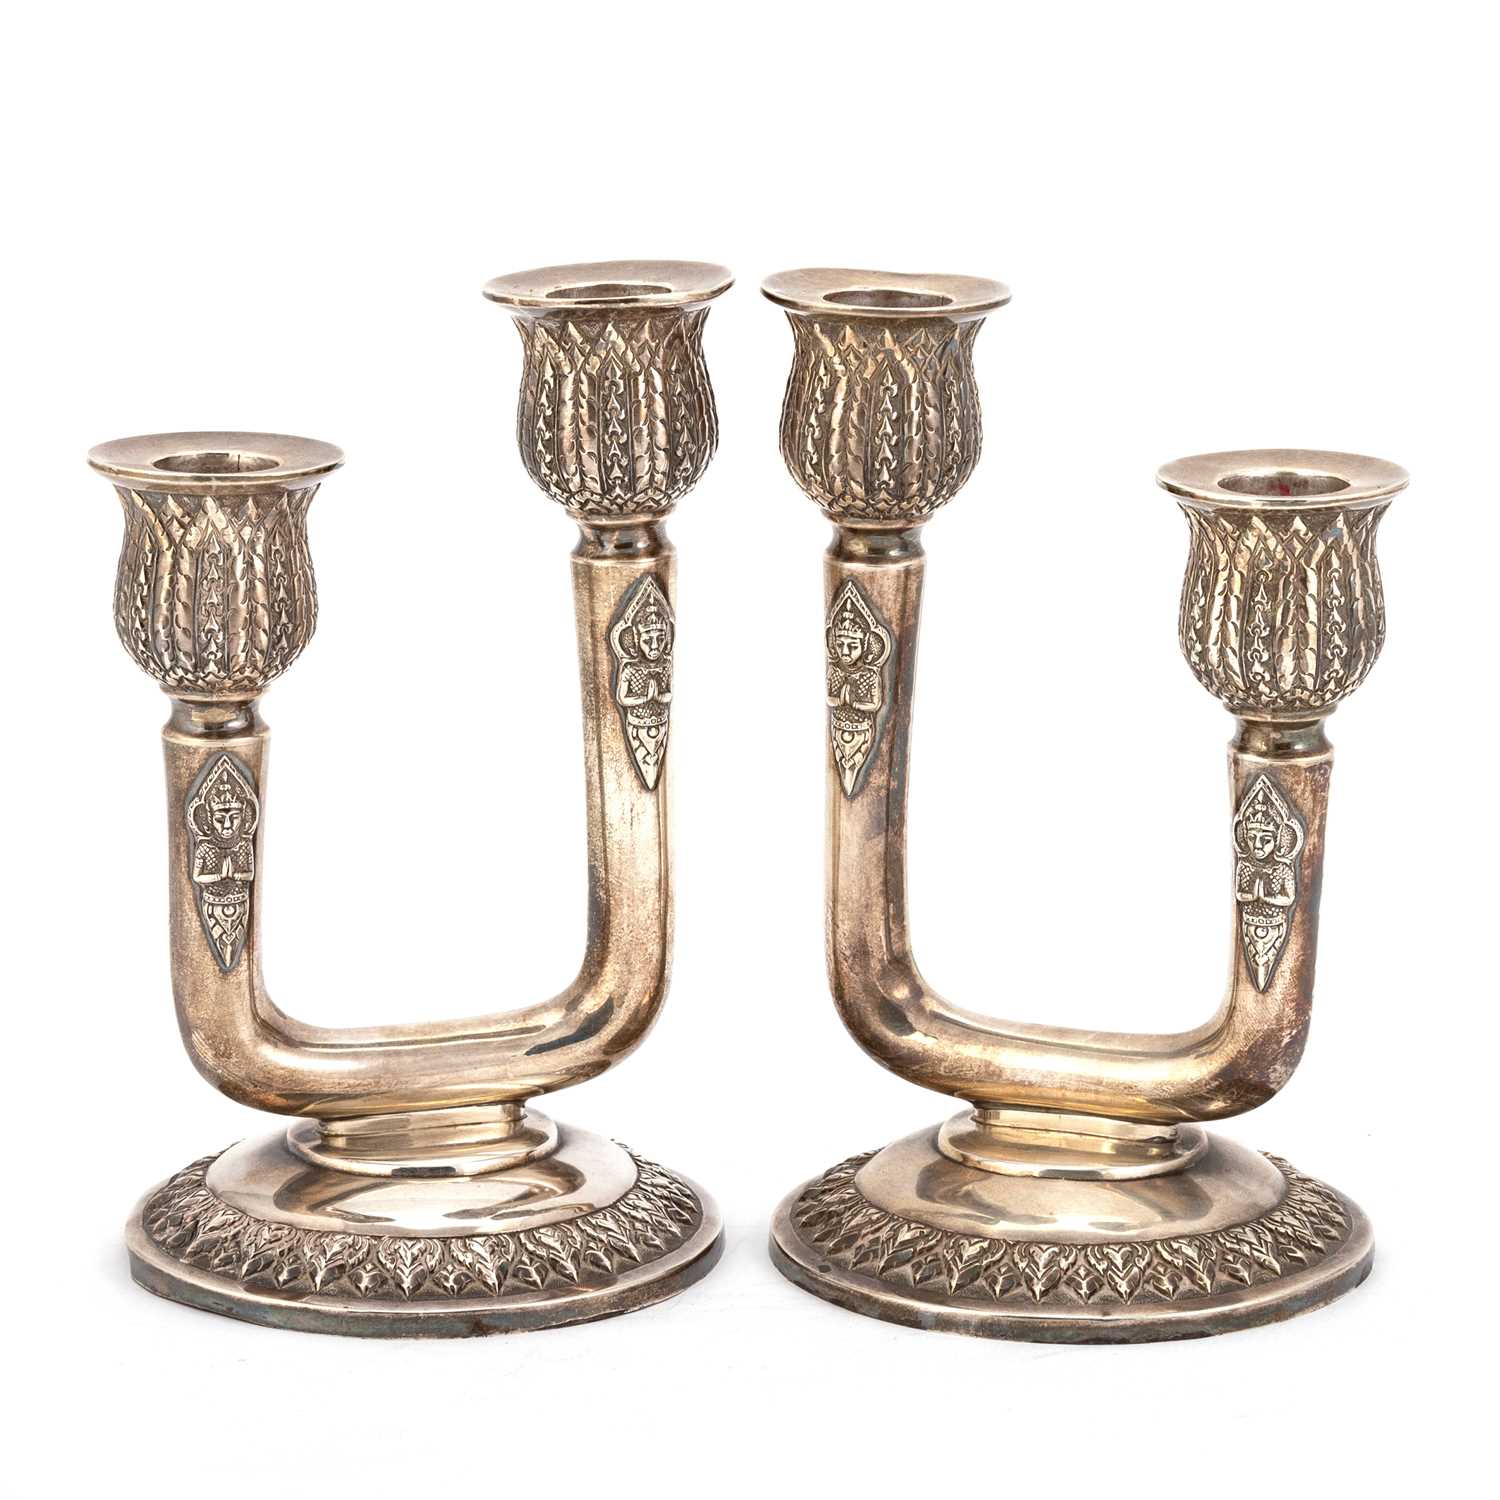 A PAIR OF SOUTH-EAST ASIAN CANDELABRA